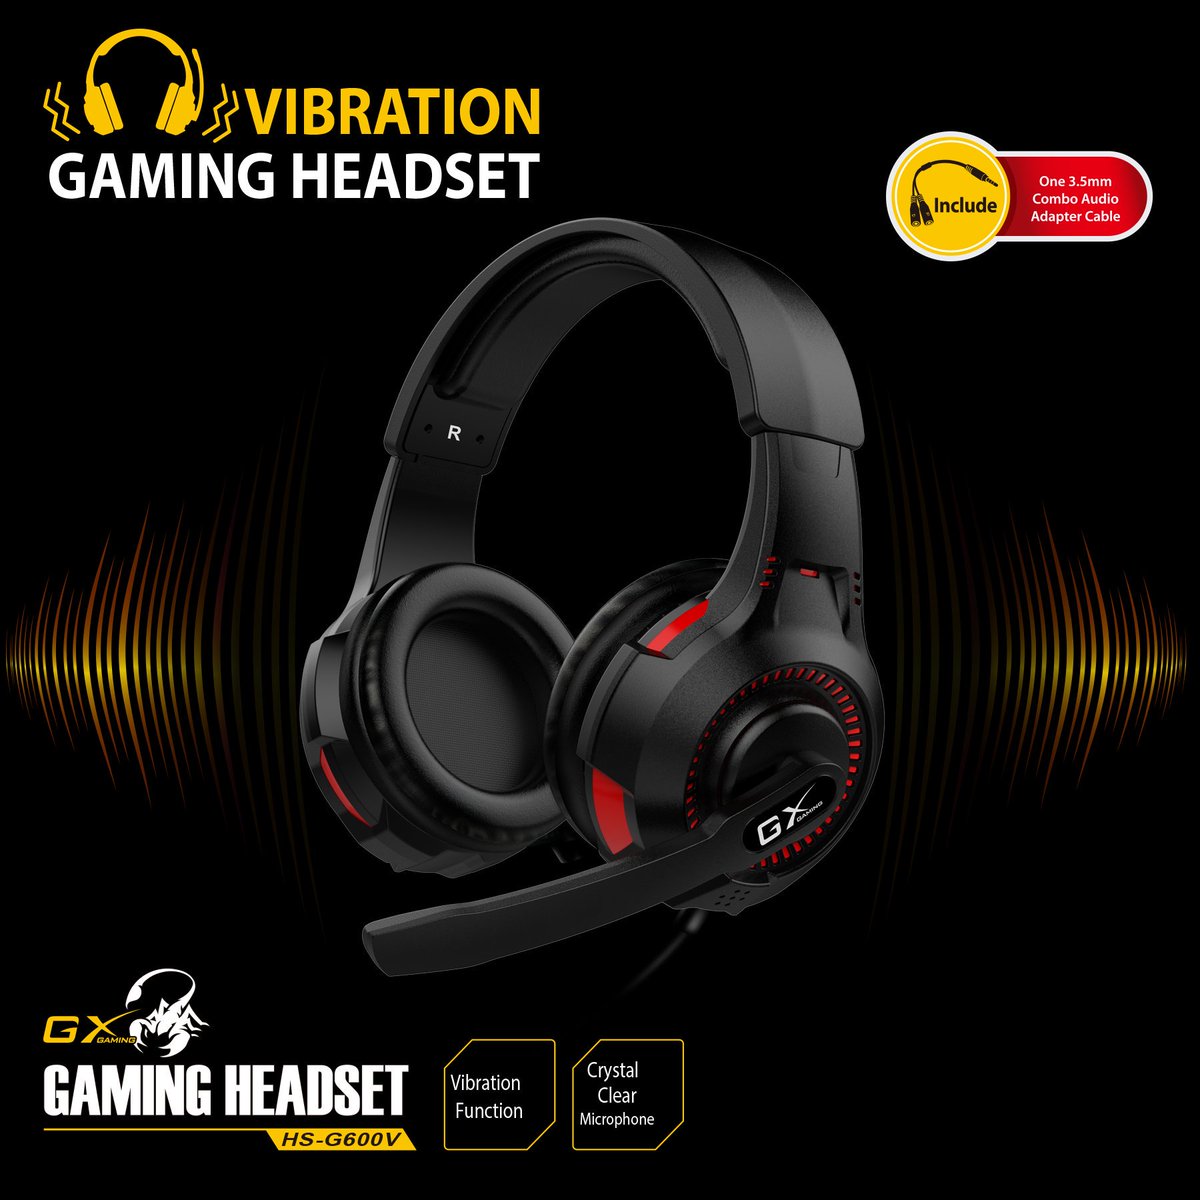 GX Gaming ME on Twitter: "#Vibration Gaming #Headset HS-G600V HS-G600V  focuses squarely on great sound quality and vibration experience with  games. With this immersive headset, you can be fully immersed in the